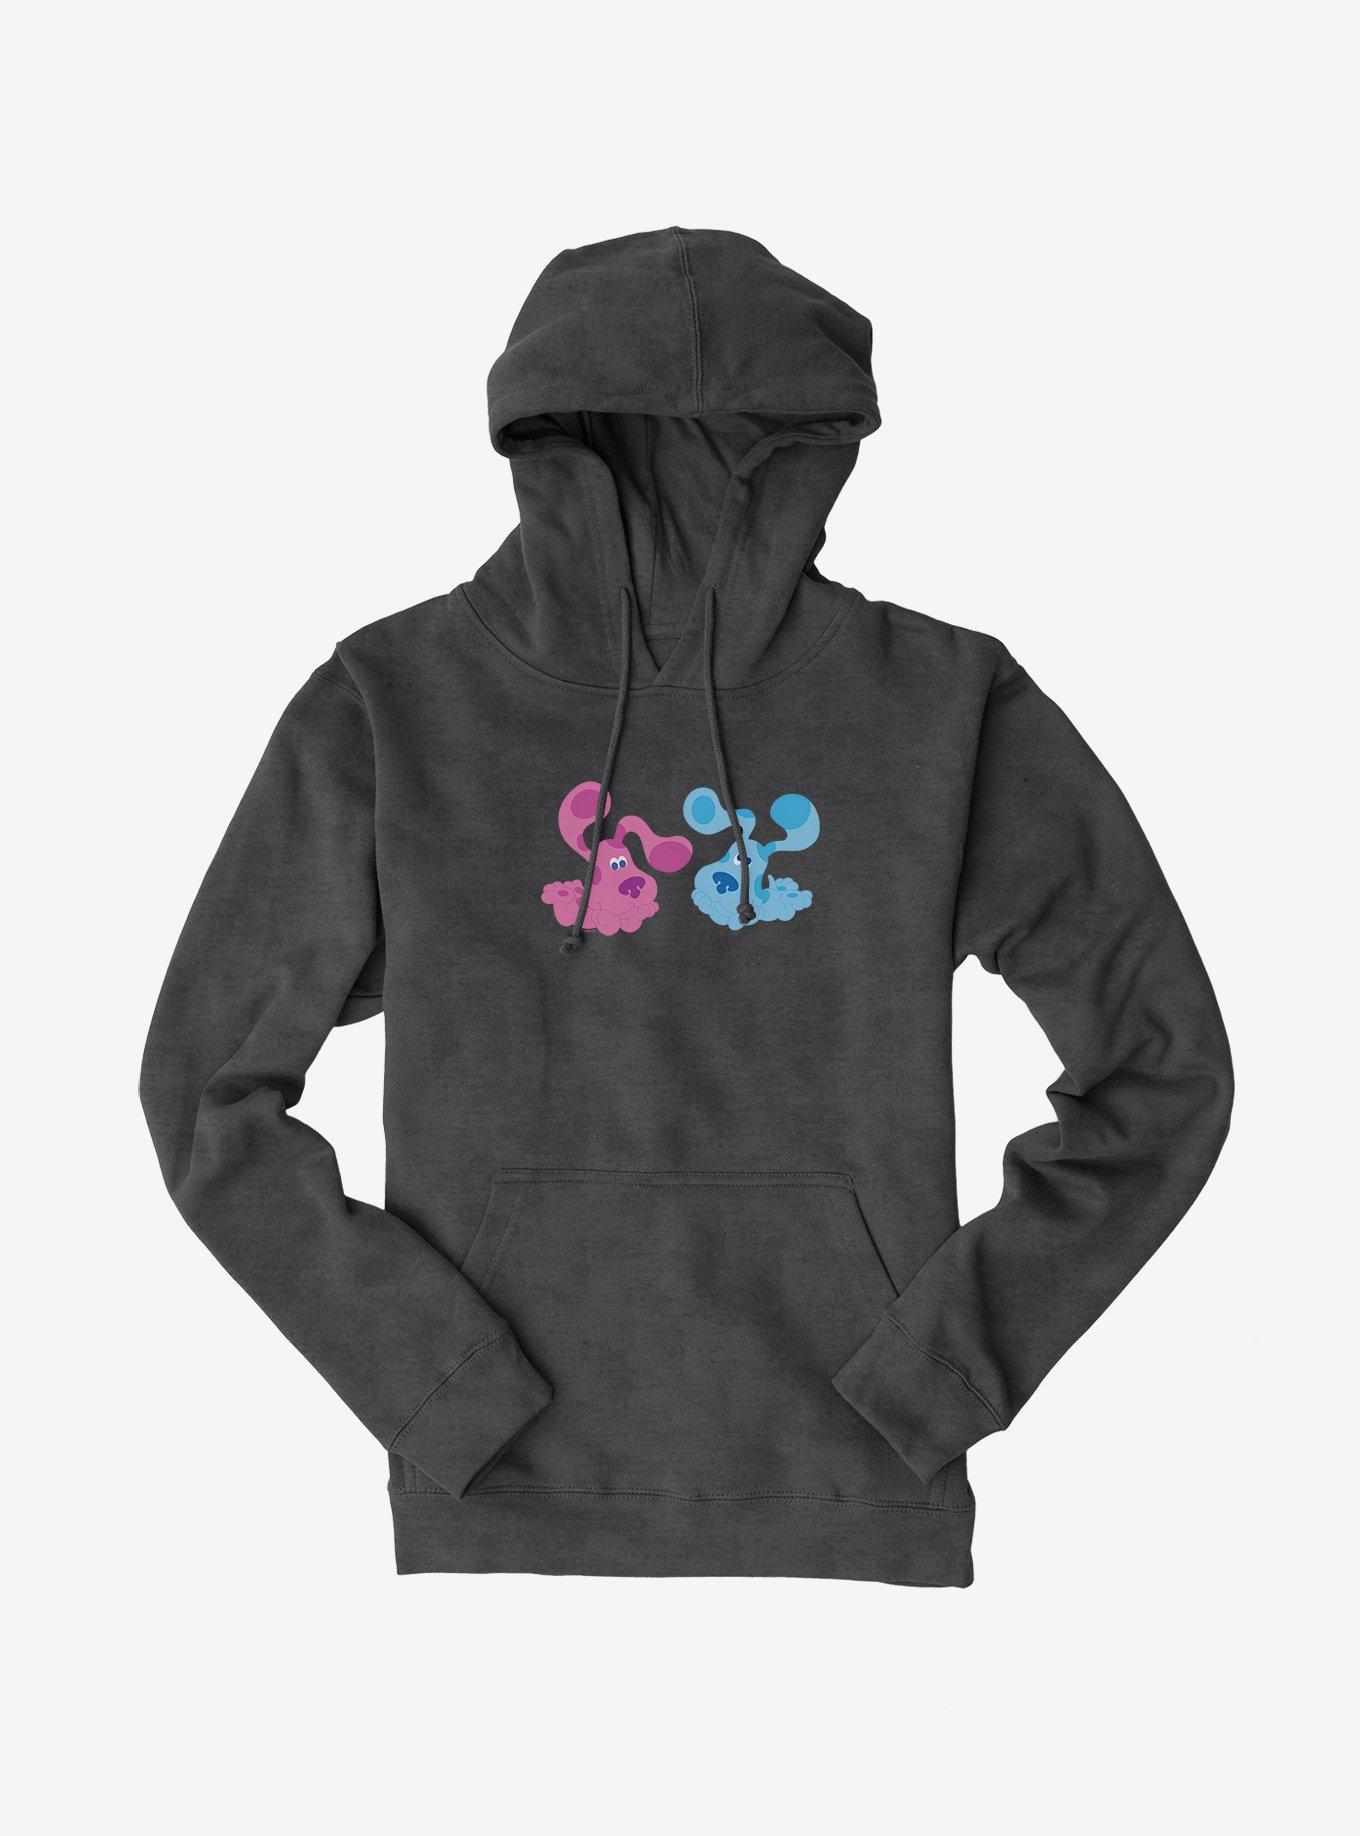 Blue's Clues Playful Magenta And Blue Hoodie